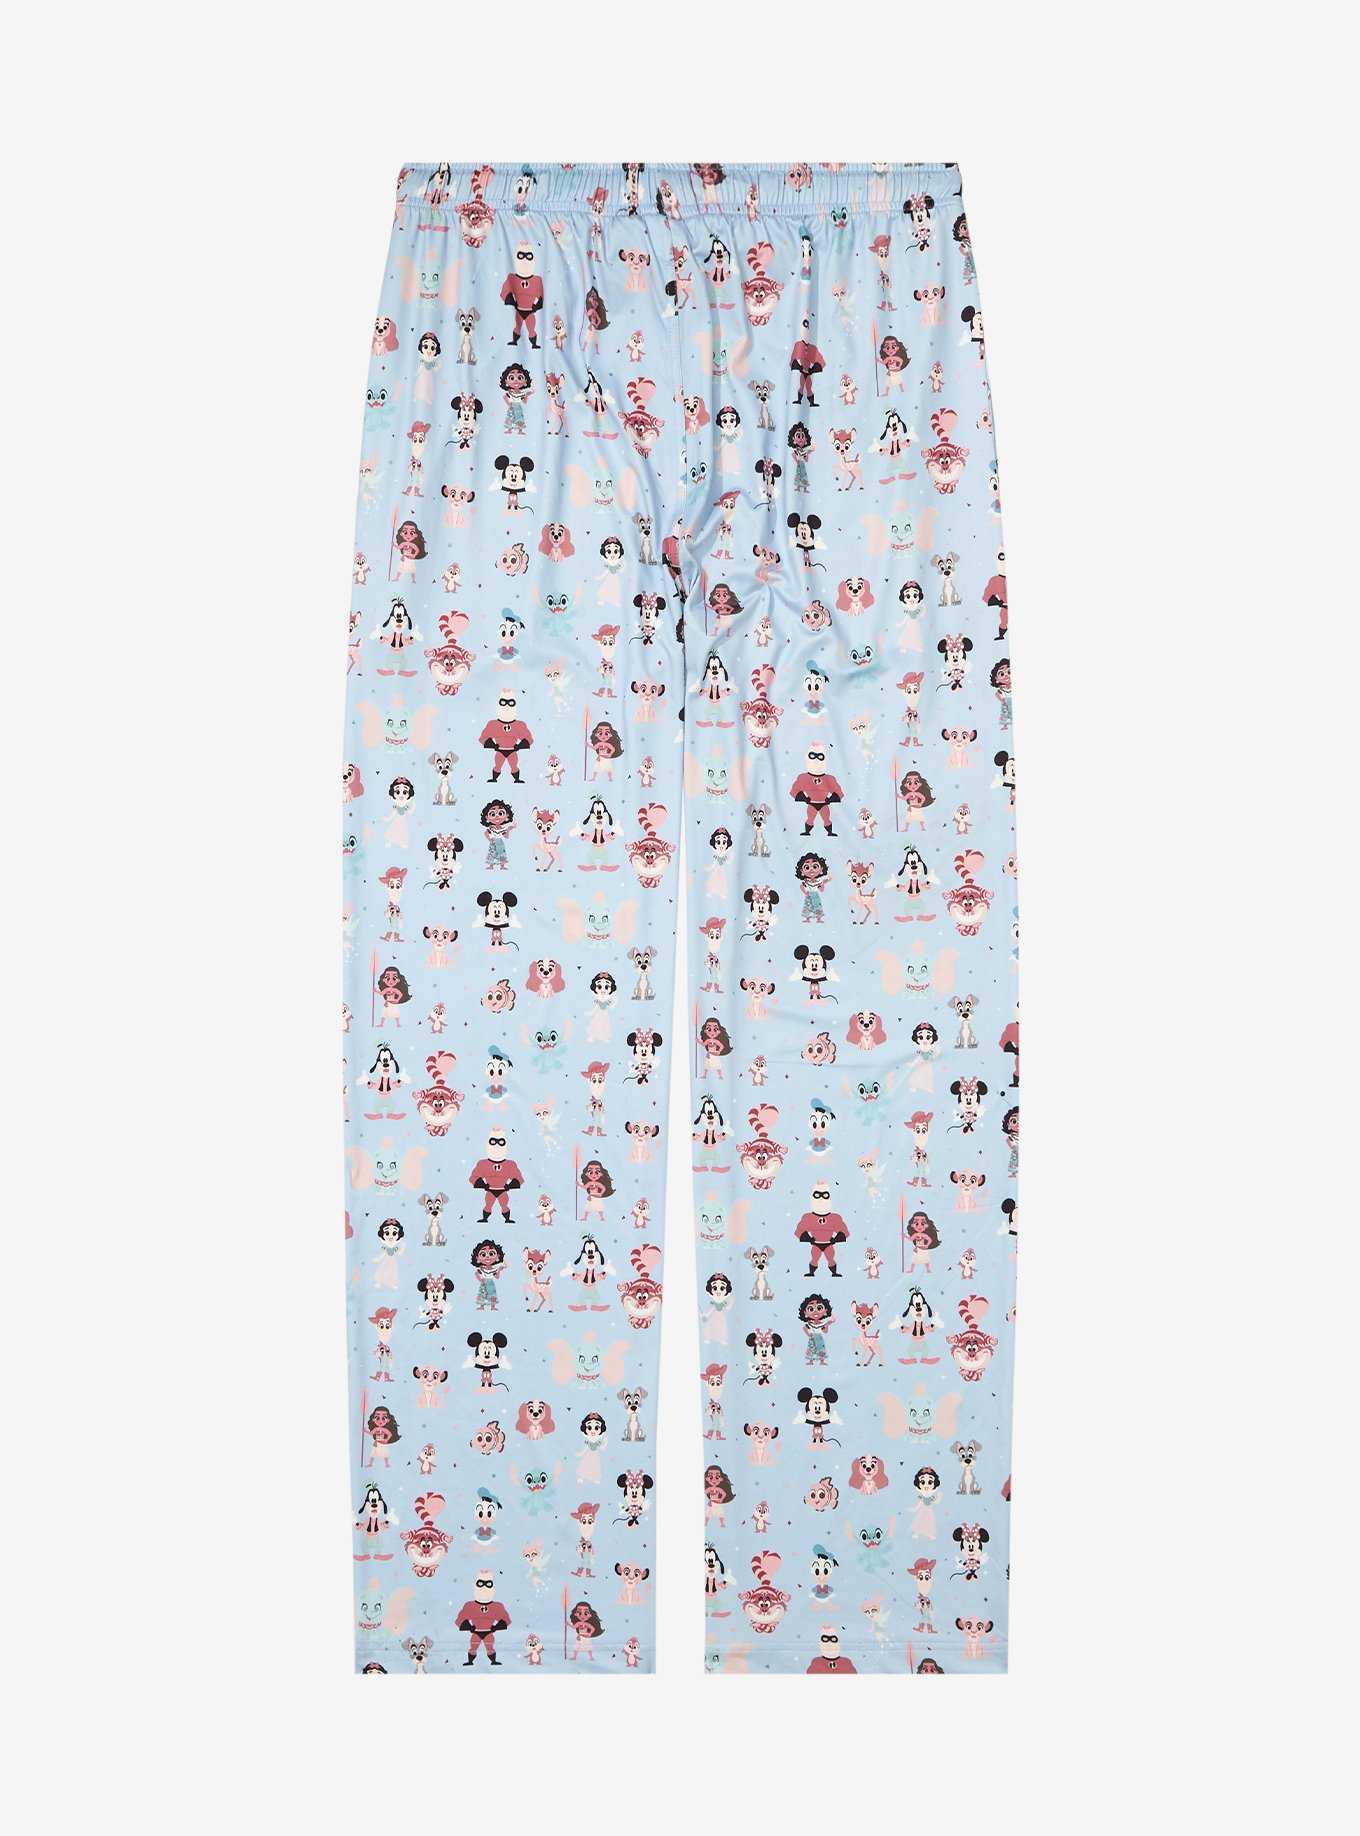 Disney 100 Character Portrait Allover Print Sleep Pants - BoxLunch Exclusive, , hi-res